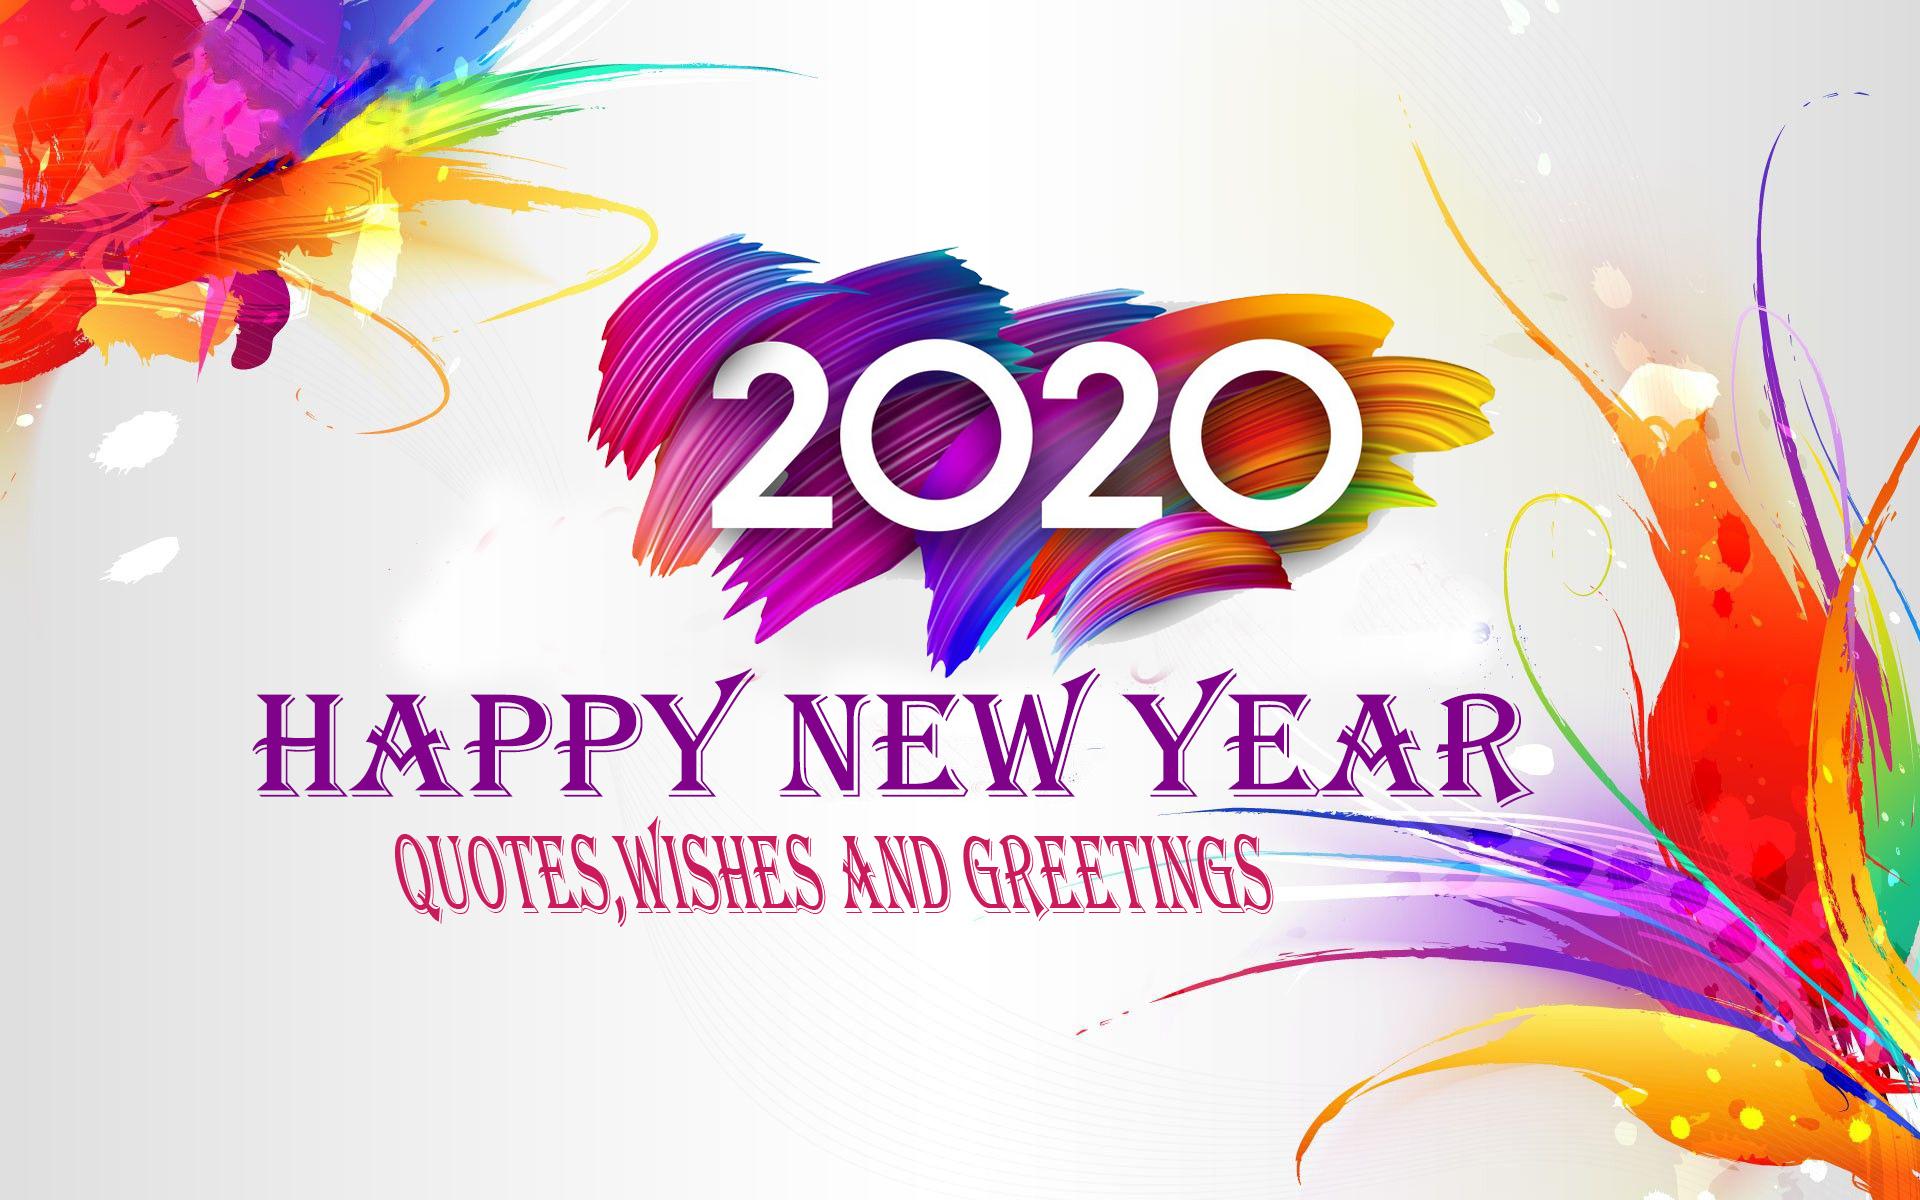 Happy New Year 2020 Wallpaper, Image, Banners New